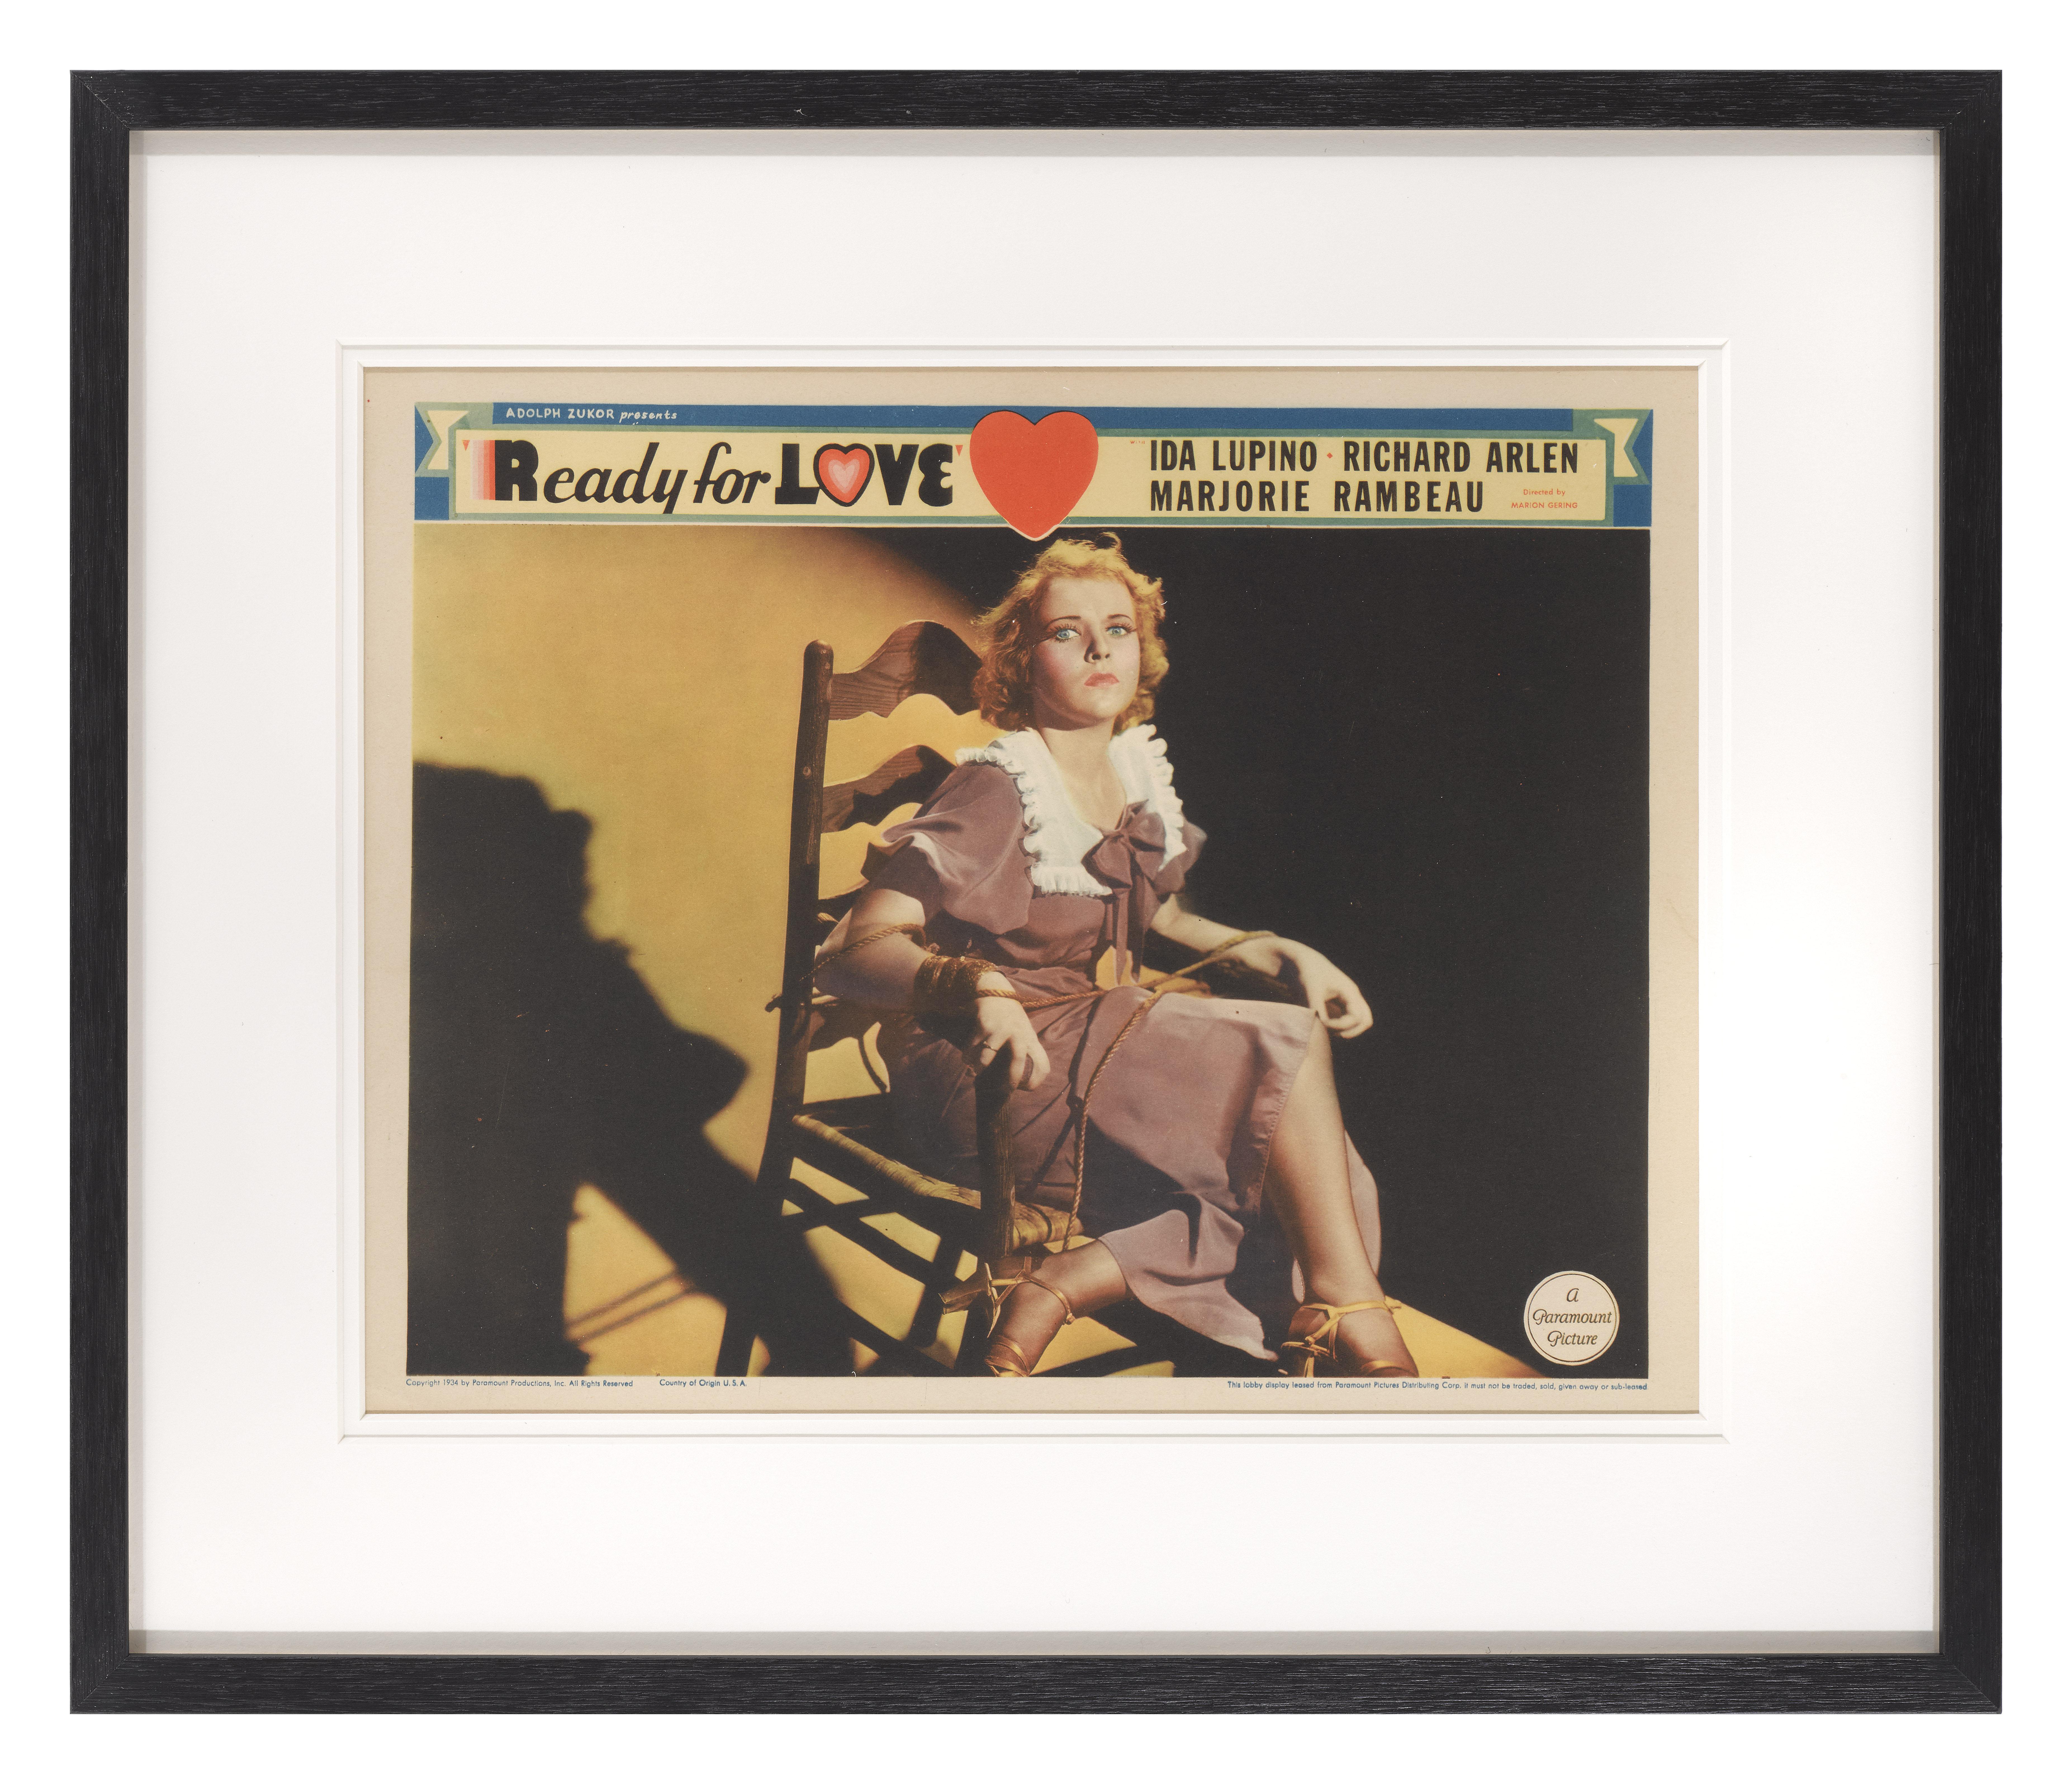 Original US lobby card for the 1934 comedy romance Ready for Love.
This film starred Ida Lupino and Richard Arlen and was directed by Marion Gering.
This lobby card is conservation framed with UV plexiglass in an Obeche wood frame with card mounts